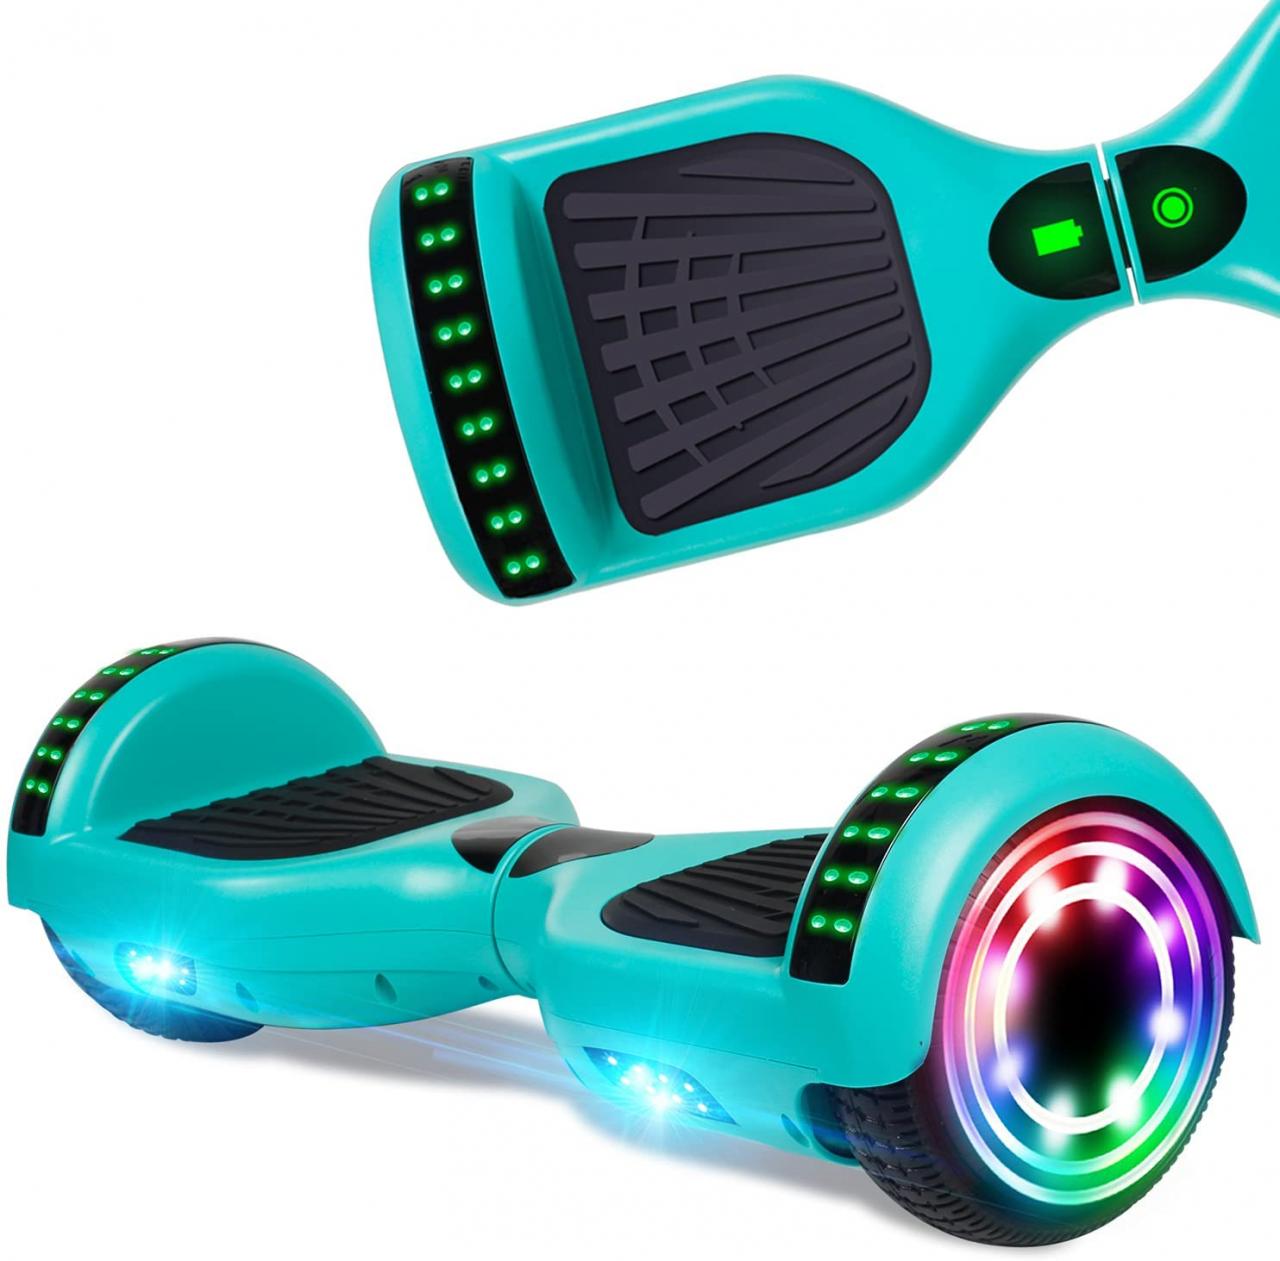 Buy UNI-SUN Hoverboard for Kids, 6.5 Two Wheel Self Balancing Hoverboards  with Bluetooth and Lights for Adults, Hover Board for Kids Ages 6-12 Online  in Hungary. B08G1N4WFR